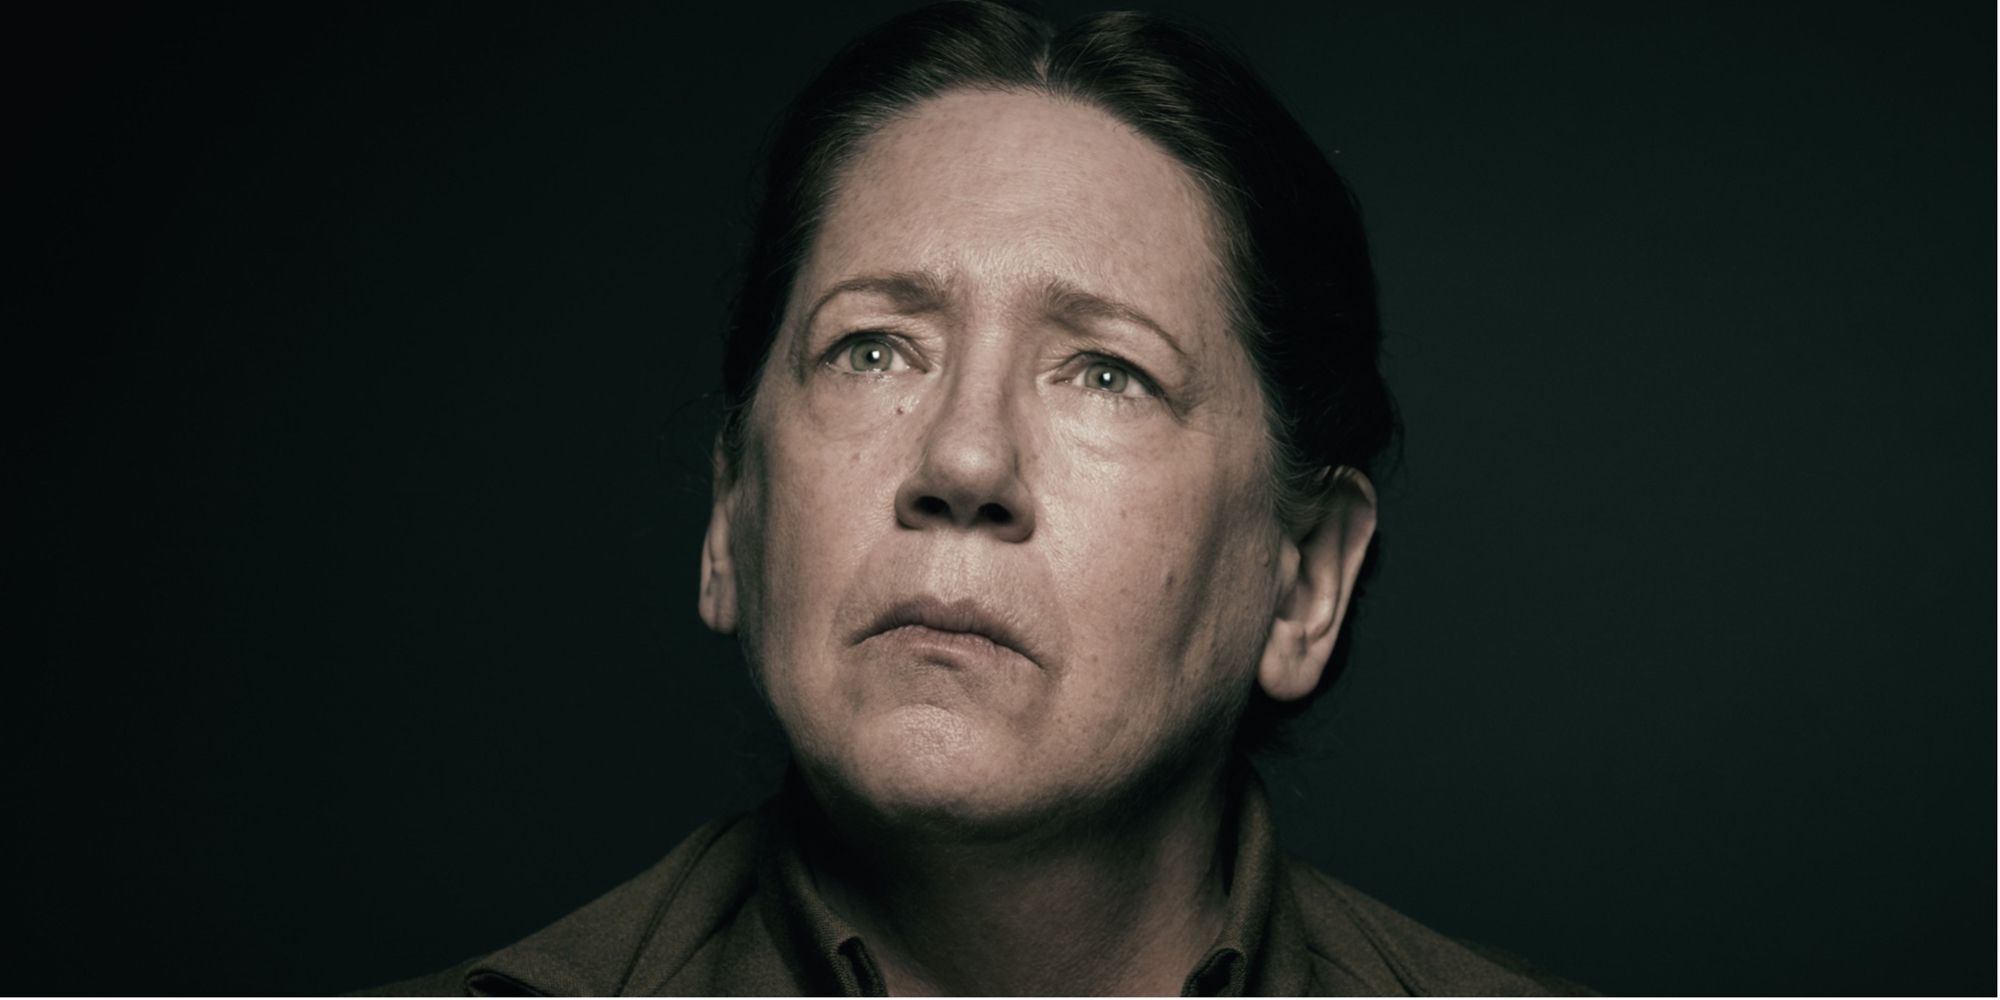 Aunt Lydia looking concerned